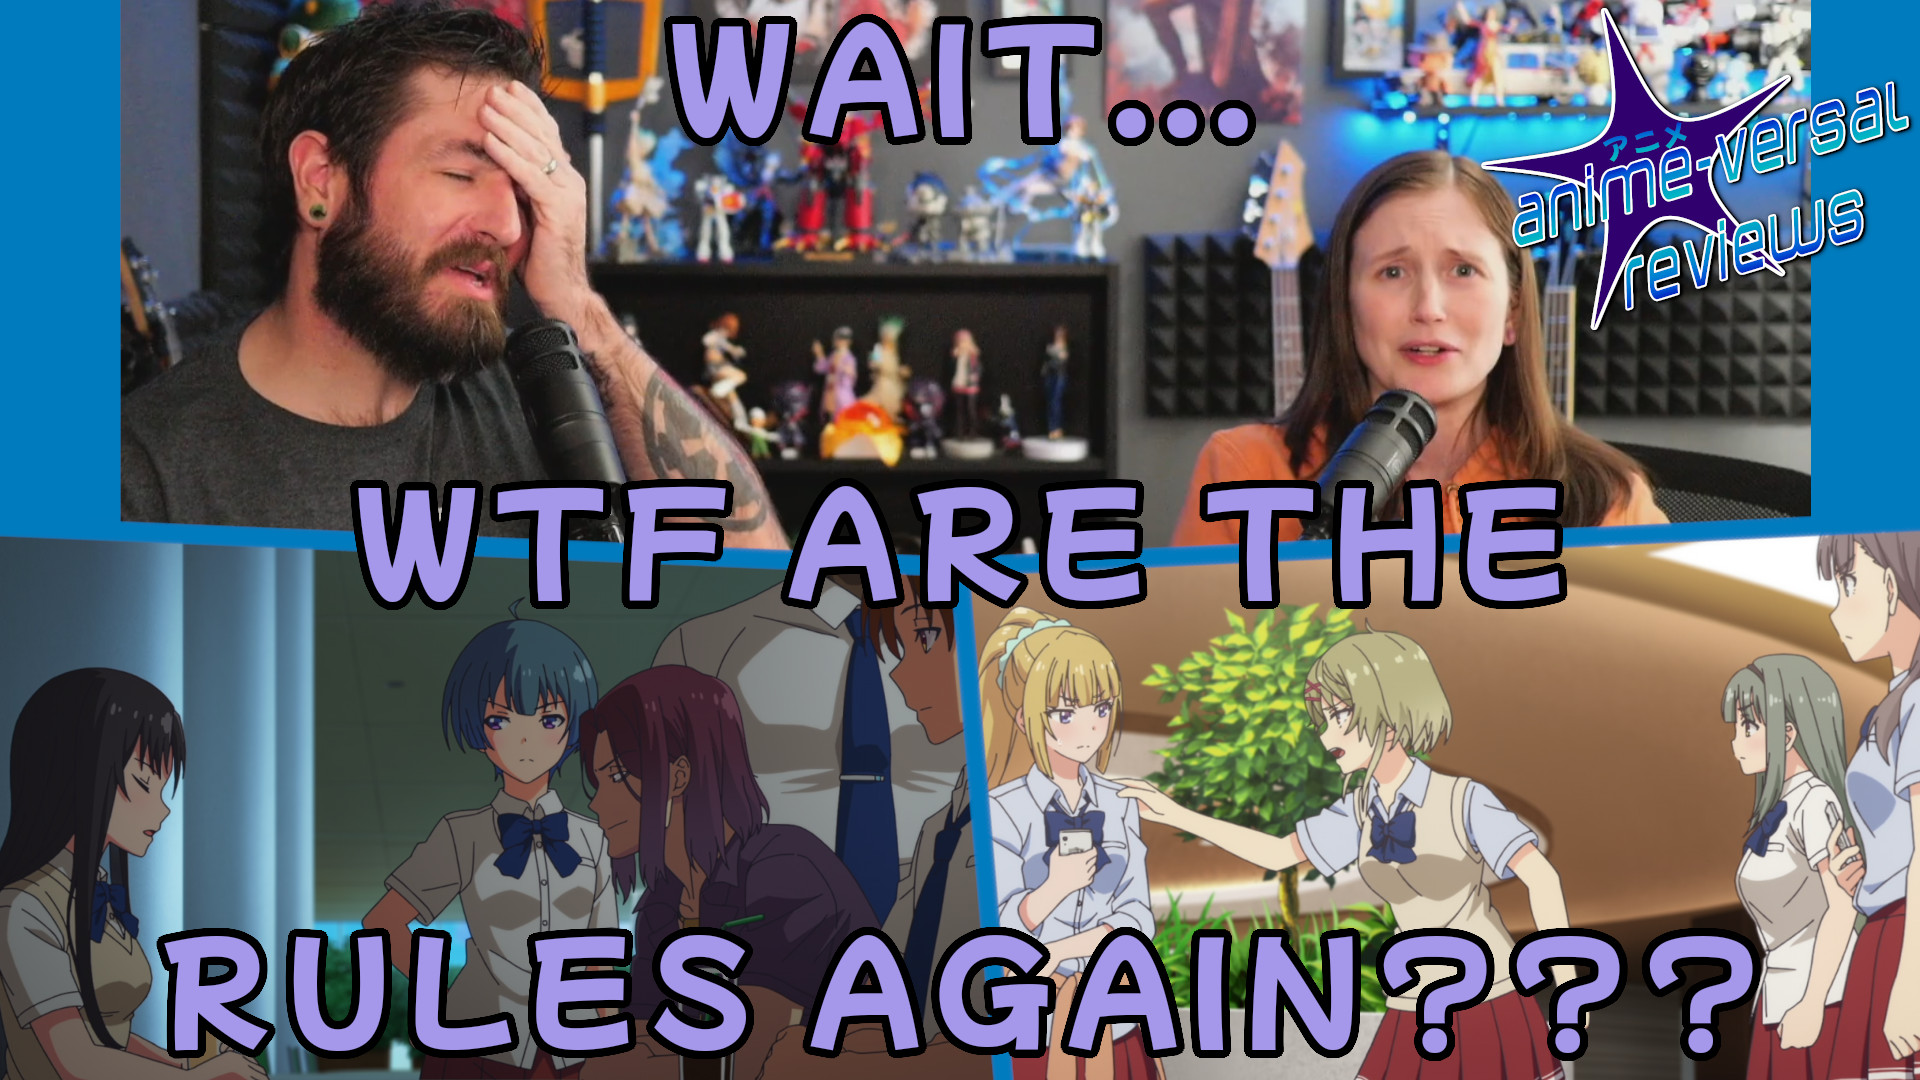 Classroom Of The Elite Season 2 Episode 1 Review: WTF Did They Say? | AVR